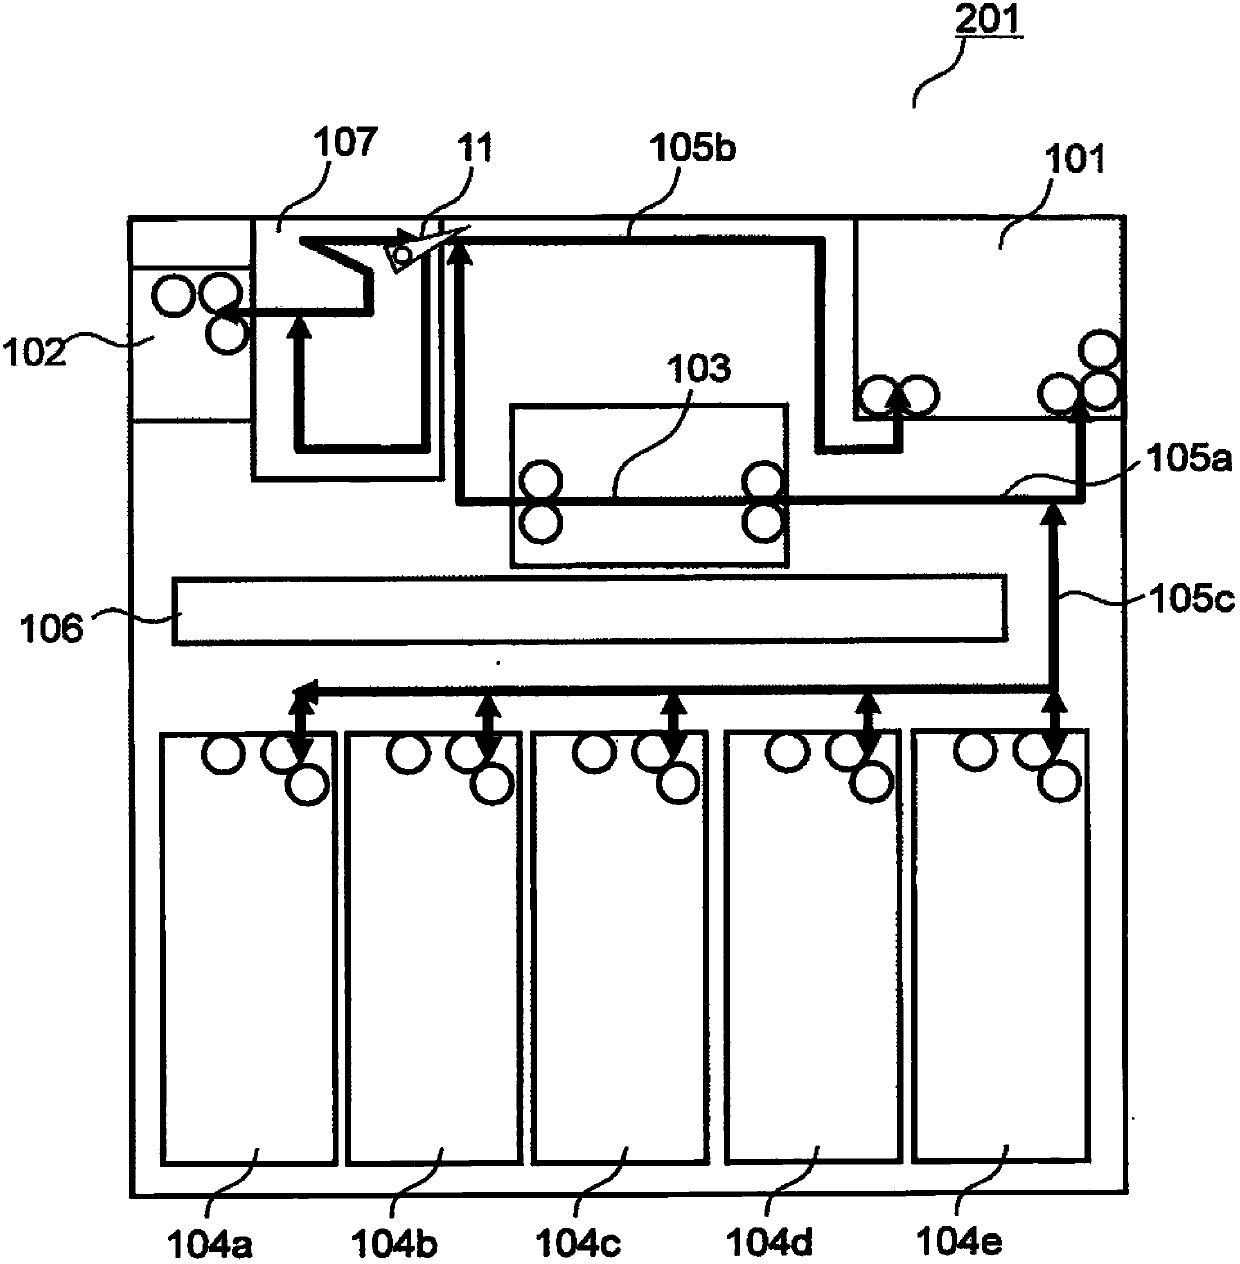 Paper currency handling device and paper currency transaction device